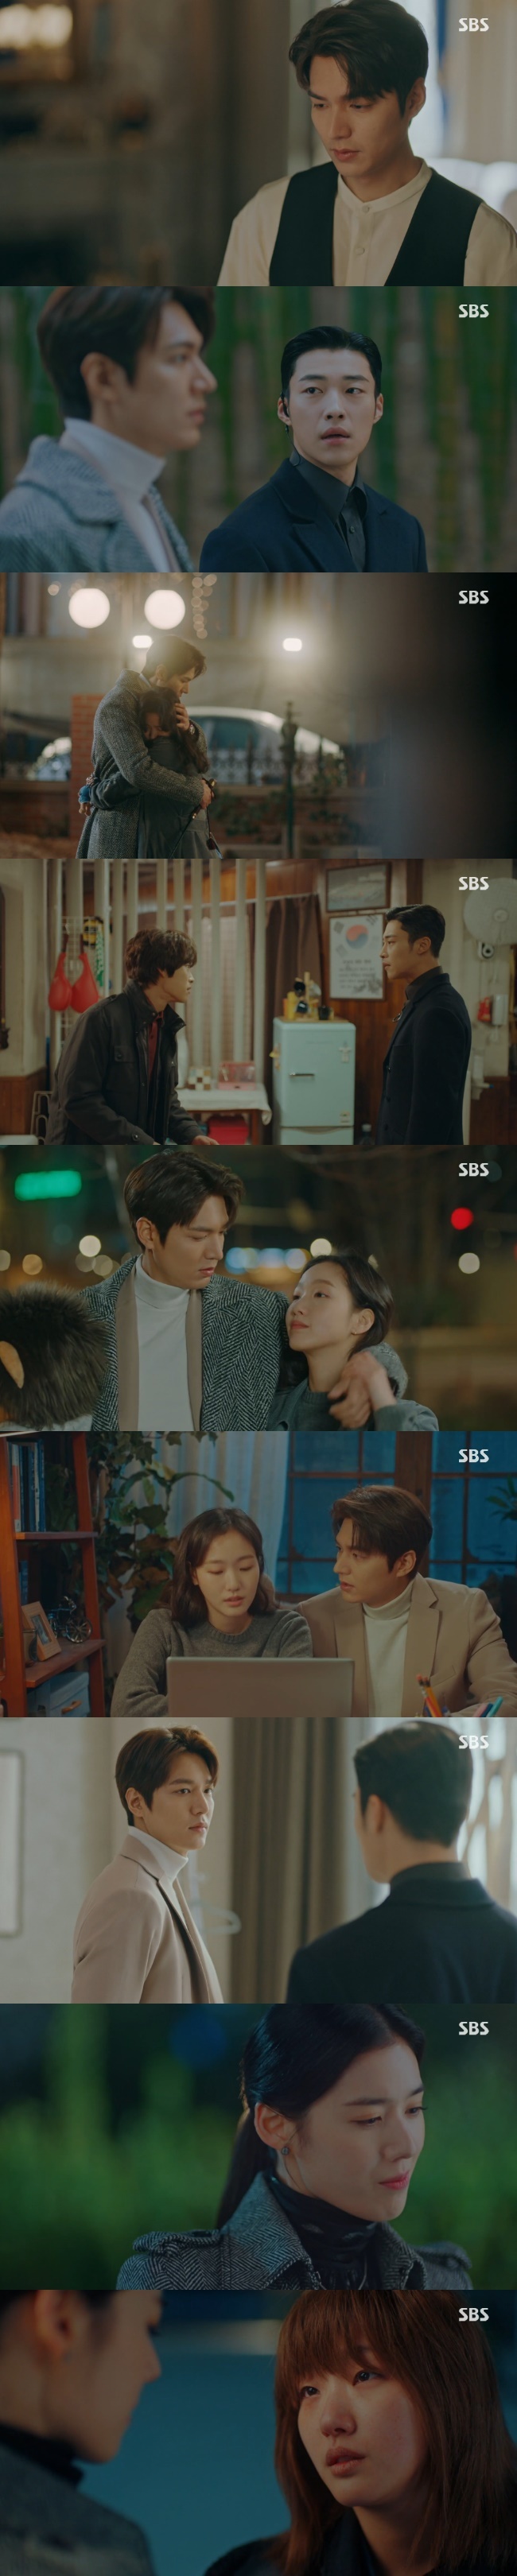 Lee Min-ho and Kim Go-eun have begun Confidential Assignment over Lee Jung-jins death.Lee Min-ho, who was broadcast on May 8th on SBSs drama The King: The Lord of Eternity (played by Kim Eun-sook/directed by Baek Sang-hoon and Jung Ji-hyun), told Joyoung (Woo Do-hwan) that he had a parallel World secret.Yi Jong-in (Jeon Mu-song) informed No Ok-nam (Kim Young-ok) that Lee Jung-jins body was another person.Lee, who received the body examination of Yi Jong-in from Yi Jong-in, felt that Irim would come to find himself to find half of the food, and had the risk of Kim Go-eun.Jung Tae-eul recalled the appearance of Korean Empire scenic beauty (Jin Yong) when he saw the appearance of Kazunari Ninomiya (Jin Yong).When asked what he would do if he had a face like his in another World, Kazunari Ninomiya said, One of the original doppelgangers is dead.It is the rules of the universe, because it is confusing if there are two things that should be there originally. He said, The world needs balance. Joyoung was waiting in the bamboo forest to prevent Egon.Joyoung pointed out to Korean Empire that both gangsters and police are chasing a person named Kim Go-eun, and that Leeon is being deceived as a steadfast.Igon, who confirmed that there was a person with the same face as Jung Tae-eul in Korean Empire, said, I will confirm that I will not believe it.We will go to another world now. He took Joyoung to the Korean Empire.Jung Tae-eul, who missed Lee, was pleased to see him in front of his eyes, and then he was embarrassed to see Joyoung come to South Korea with Lee.Joyoung was embarrassed by Where the hell are you? And Jung Tae-eul said, I know the feeling well.Im worried about you and I, but Im welcome to South Korea.Lee was confident that Cho Eun-seop (Woo Do-hwan) would not be seen, but as soon as he came to Korean Empire, Joyoung and Cho Eun-seop met each other.Joe Eun-seop fainted when he saw Joyoung with his face, and Joyoung was greatly embarrassed.Jung Tae-eul ordered Cho Eun-seop to go around during the day and Joyoung to go around at night in case of emergency.Joyoung, who was left alone with Cho Eun-seop, was pathetic to Cho Eun-seop, who had a big dream without a special plan.Jung Tae-eul provided Lee with a cell phone and typed in contact with people who would help him in South Korea.I called him and said, What did you do today, and tell him that I wanted to see you so much? And Jung Tae-eun said, I am too.Since then, the two have visited the place where they pick up the dolls with a gun shot and enjoyed a small date.Jung Tae-eul shook his hand as he took his hand and put his hand on his shoulder. Jung Tae-eul said, I do not know when to see this.Im a detective, but Im waiting for him.When Ion asked if he was threatened, he felt that he could soon be in danger.Jung Tae-eun, who was confirmed by Lee Gon to have K Stadium in Korean Empire, went to the voice file related to the incident in Susa.If I cover it, its really covered up. Theres only two people in this world who know it. Me and the real killer.The two worlds are already out of order, and I know that, so what do I do? Im a South Korea police officer.So, if you know anything, its different. This is a Confidential AssignmentSusa that we can do only.You tell me only two things, dont tell me not to come, dont tell me not to go, dont tell me that if you say that, I dont think Ill do anything.Im asking you not to get tired. After that, Jung Tae-eul tracked Lee Sung-jae, who died 24 years ago, who had the same face as Irim, to track the case.Joyoung persuaded Egon to return to the Korean Empire.Igon knew that Irim was crossing the dimension like himself, and left Joyoung in South Korea and tried to get back to the Korean Empire to find out the truth.After proving that time stops every time I cross the door of the dimension, Igon says, There is something that he and I have shared: if I am taken away, he becomes the only one to open the two World doors.Then there is no World on that side. You must shoot him as soon as you see him. It is Hwangmyeong. Lee Ha-na